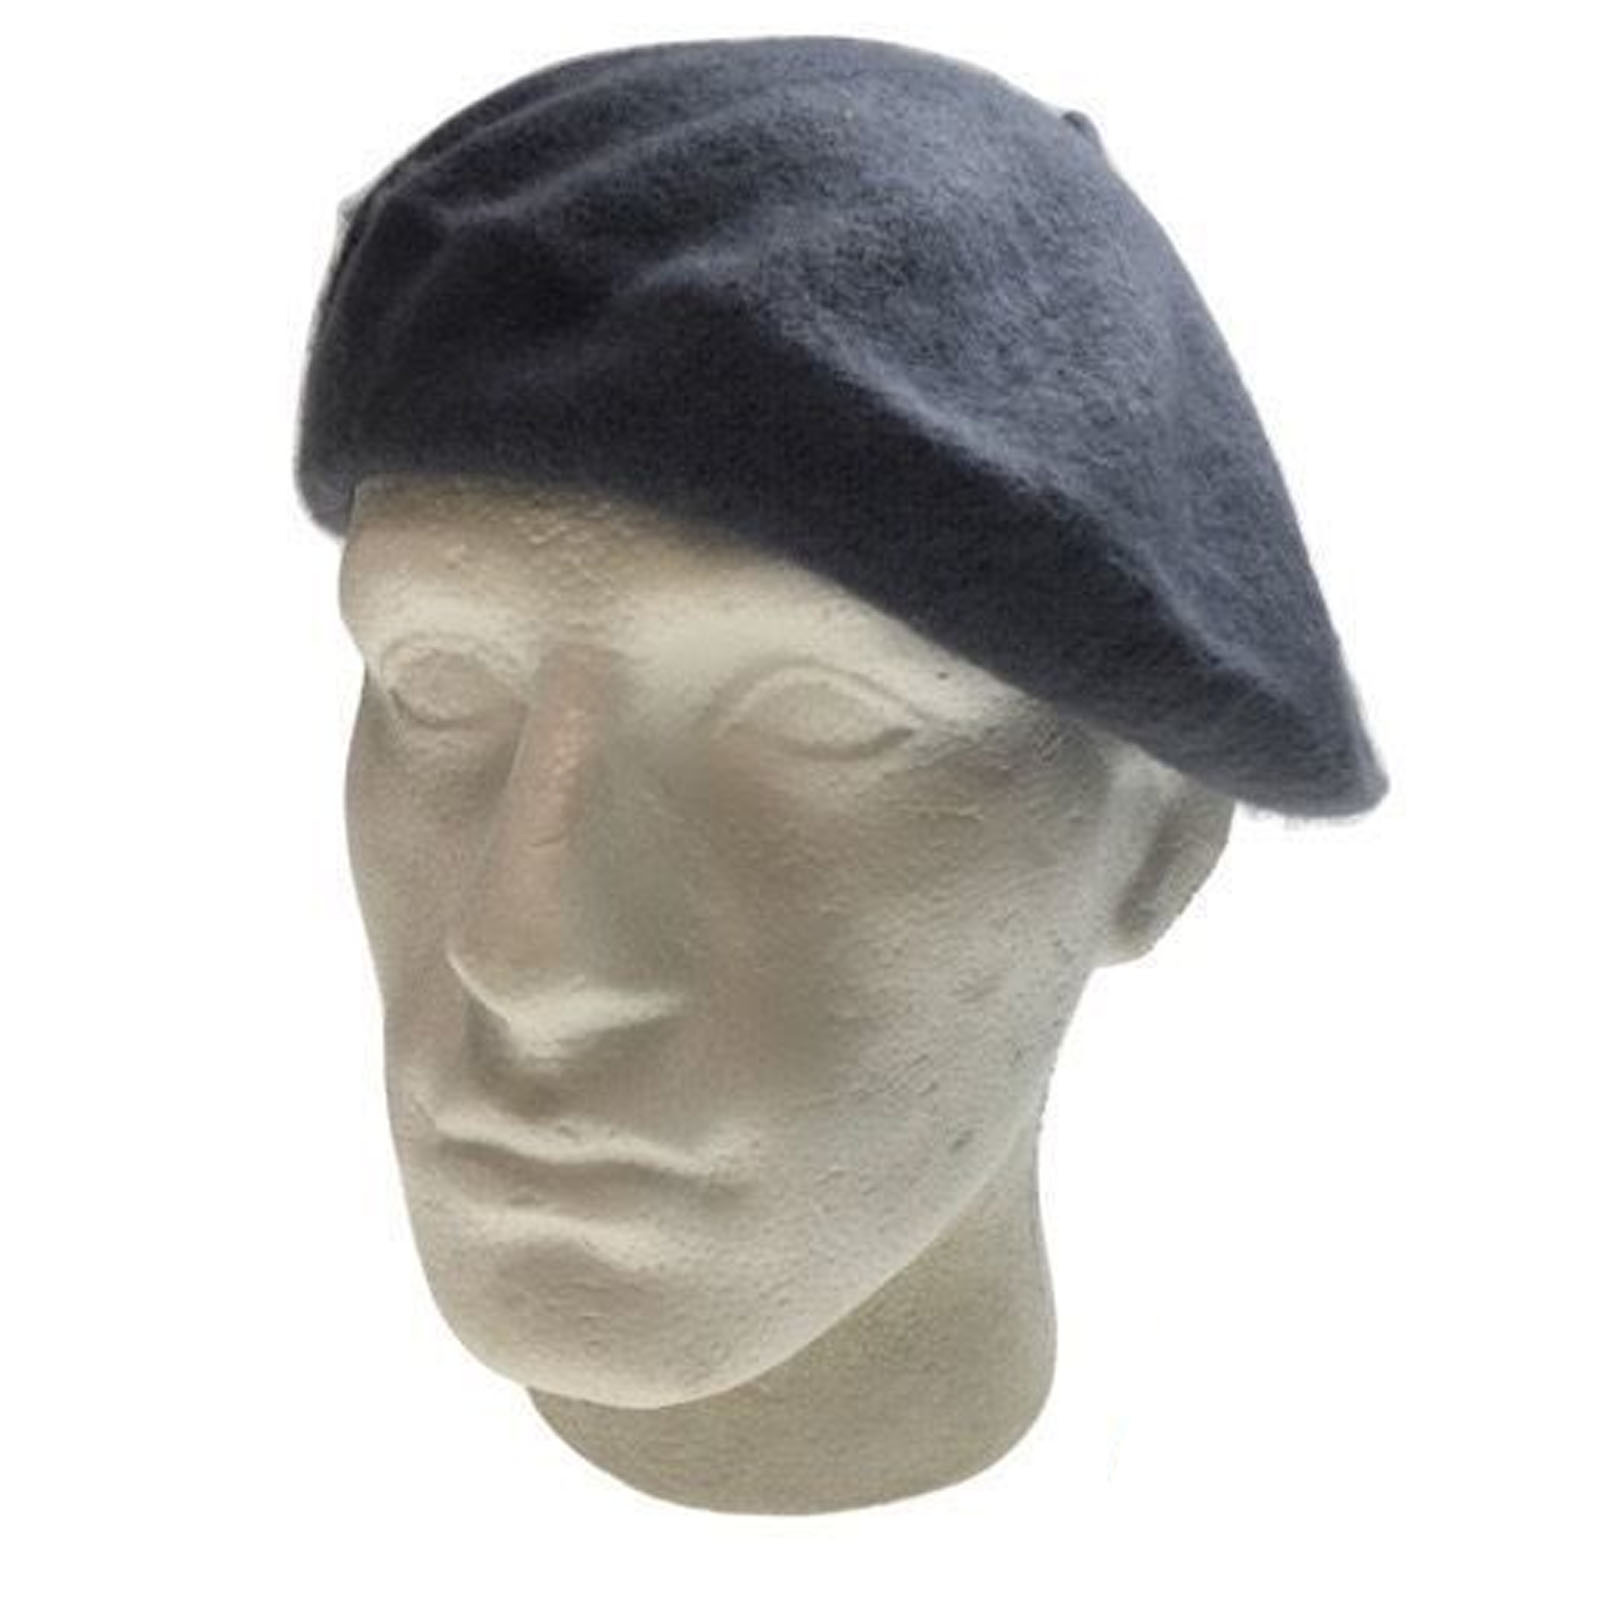 Unisex FRENCH BERET HAT Newsboy Military Cap Winter Warm Army Style ...